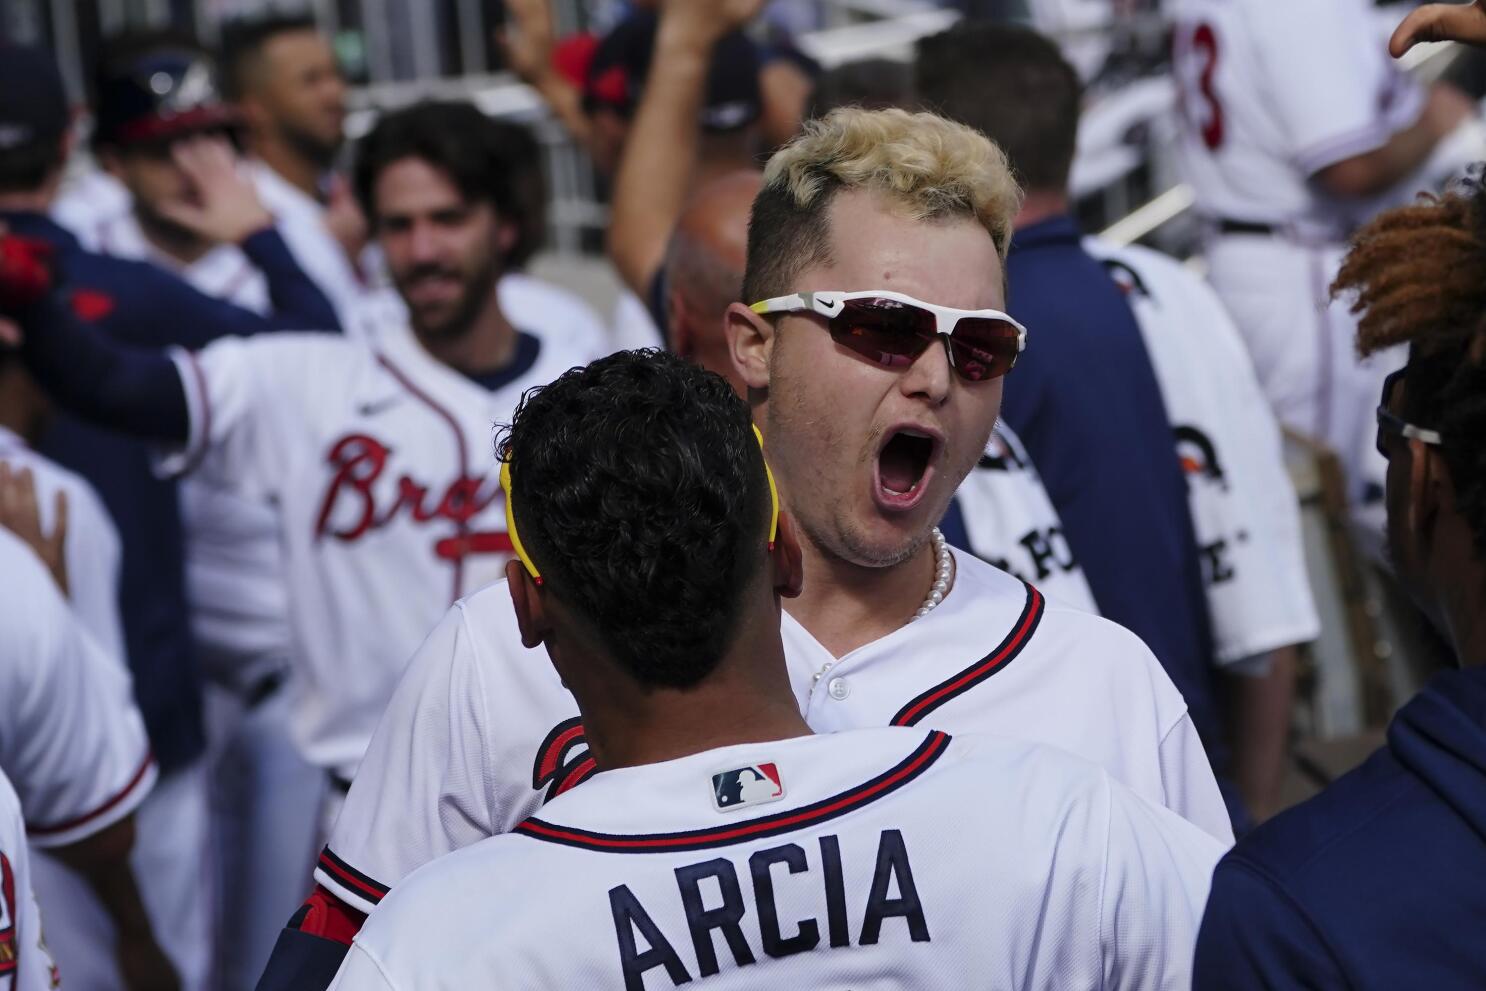 Brian Snitker Drops Bomb and Announces Freddie Freeman and Three